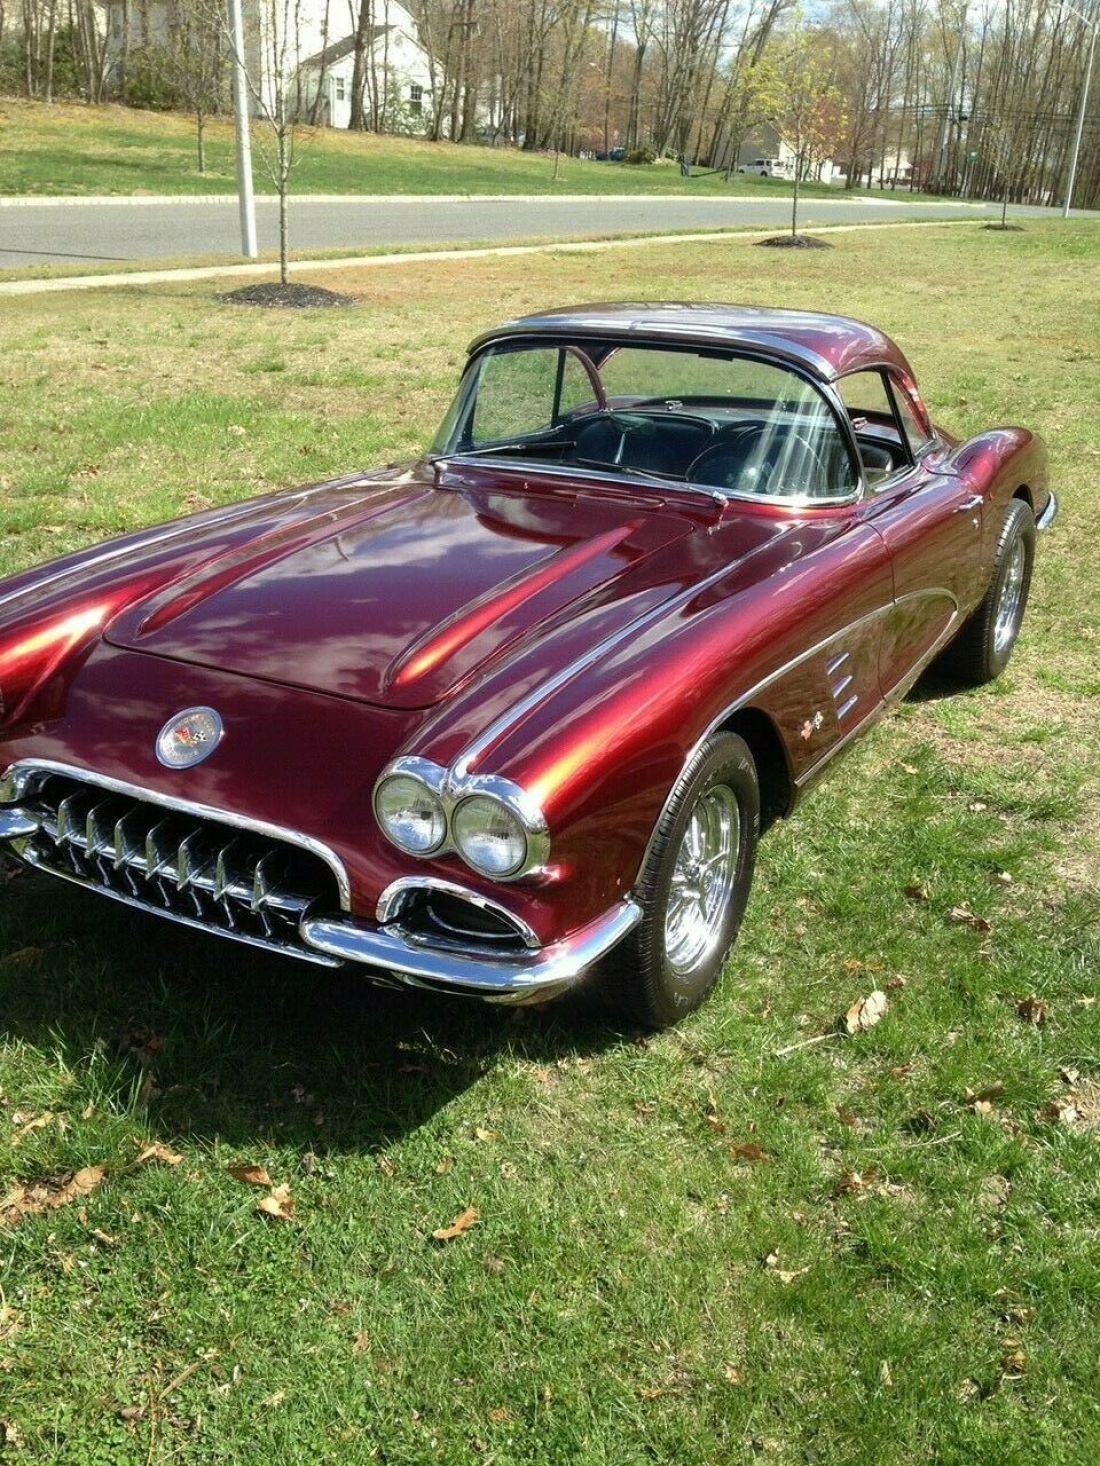 candy apple red corvette